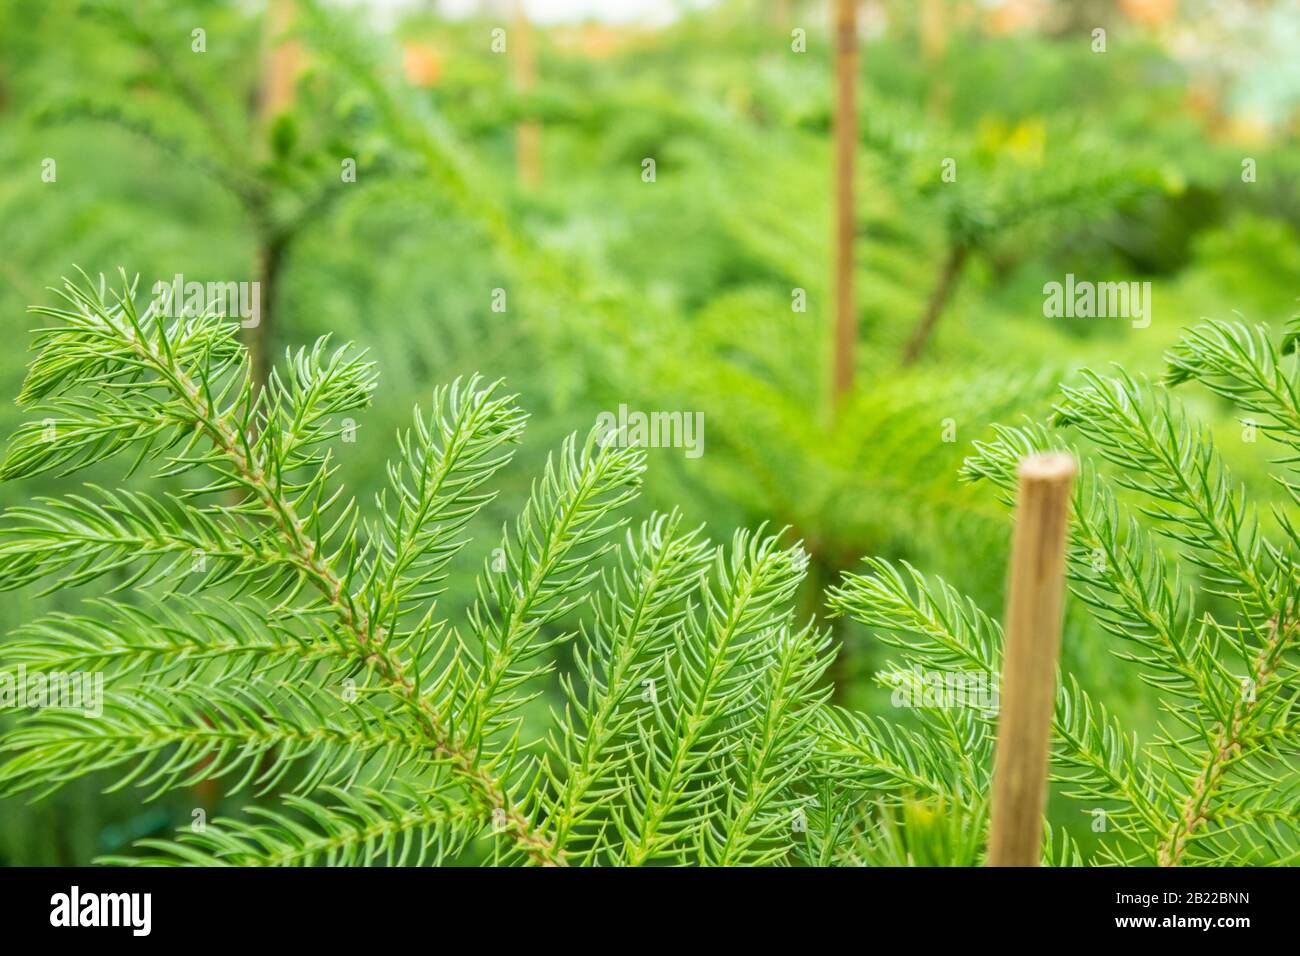 The prickly leaves of the Pinaceae Abies plant close up. The garden was photographed at the market. Stock Photo